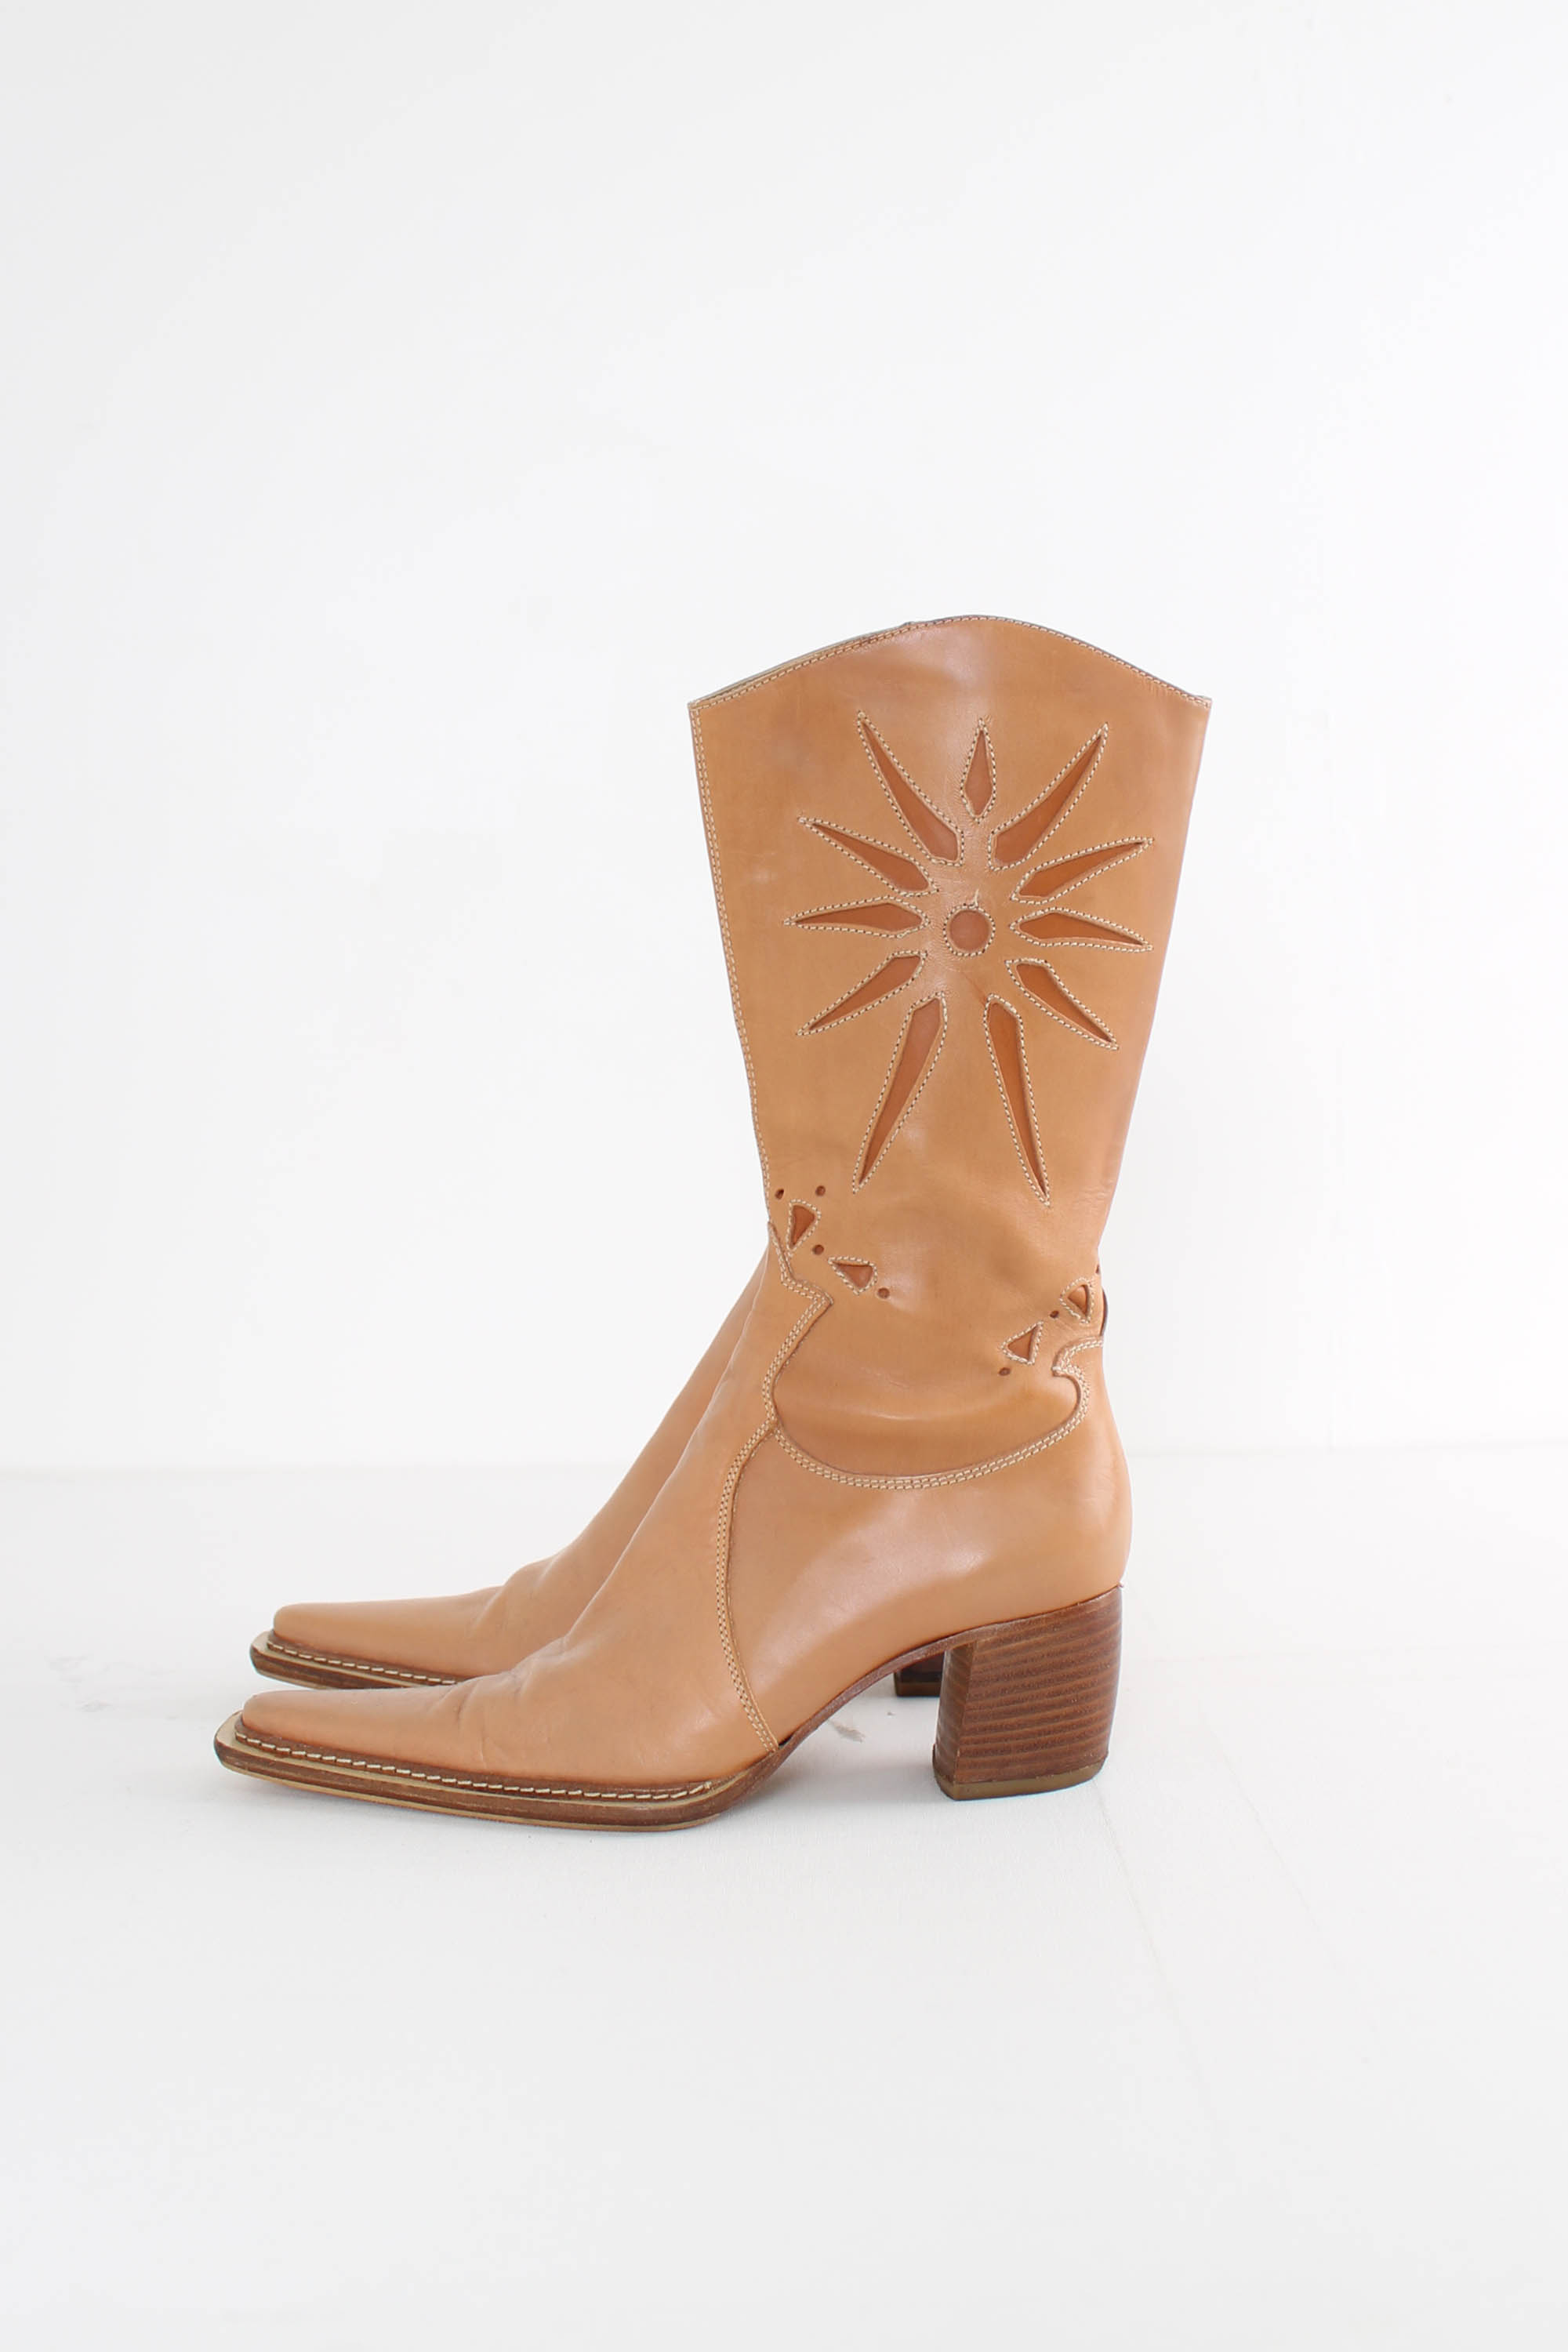 north star western boots